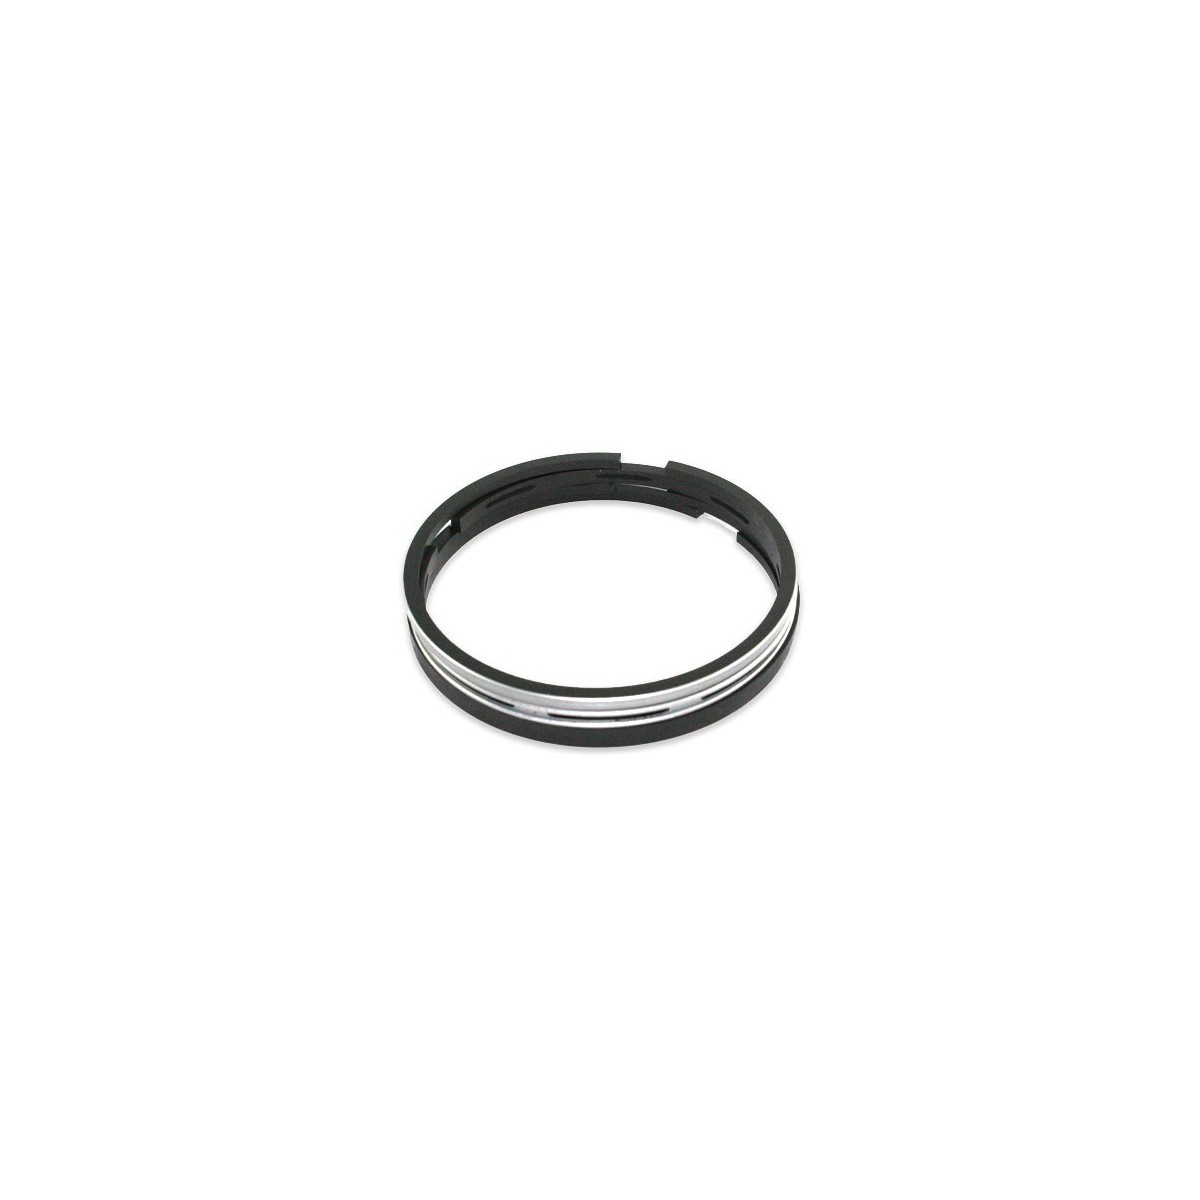 Set of rings for the piston YANMAR YM1500 80 mm